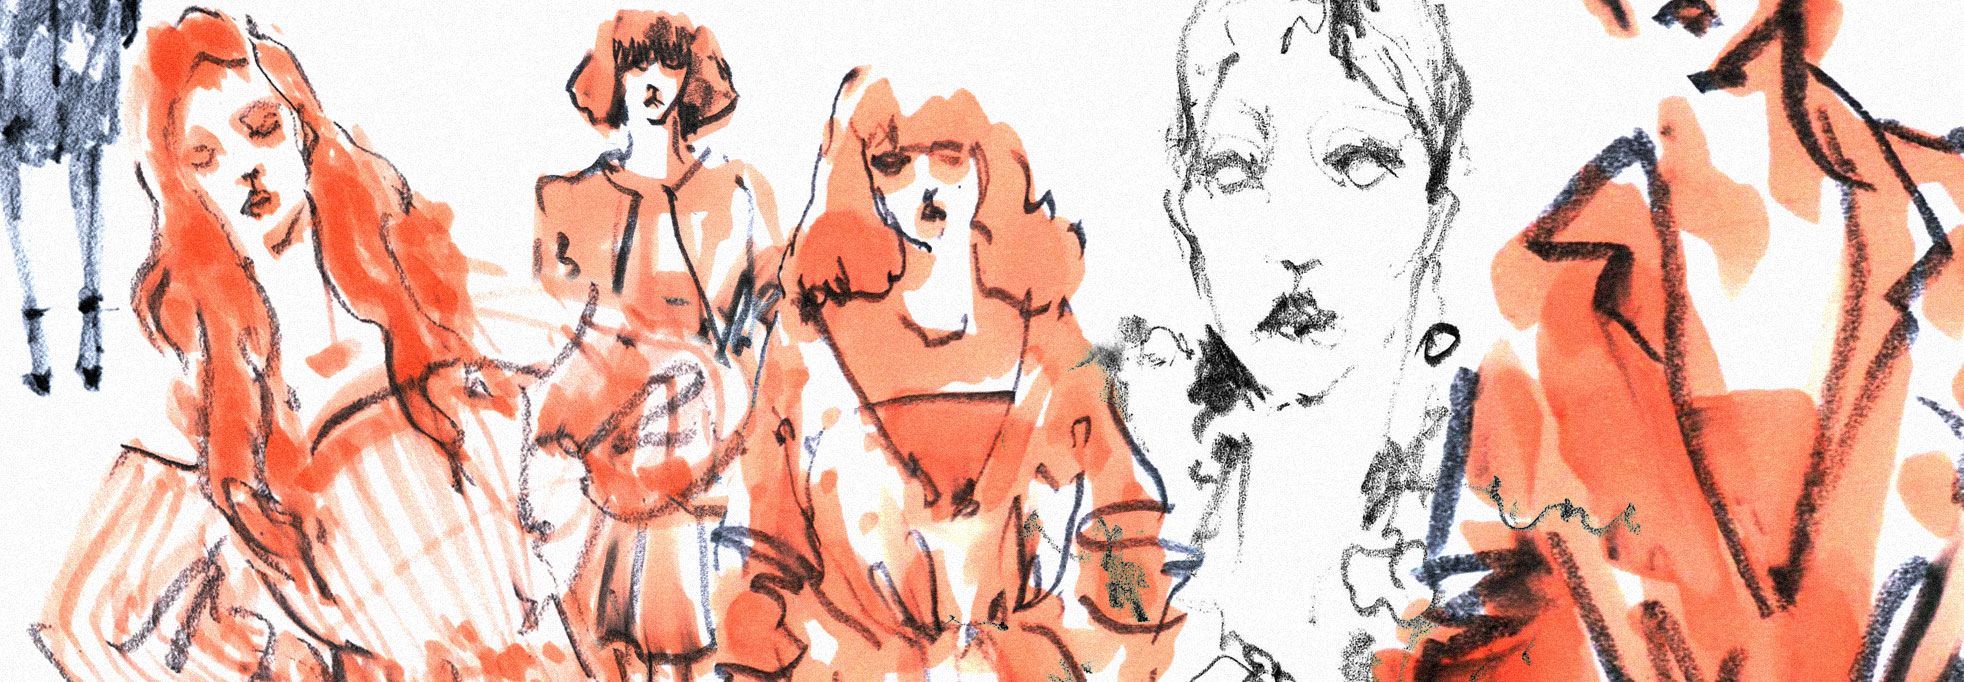 Fashion sketchbook male and female: a book with figure templates for  fashion design students, pattern makers, illustrators, and anyone  passionate